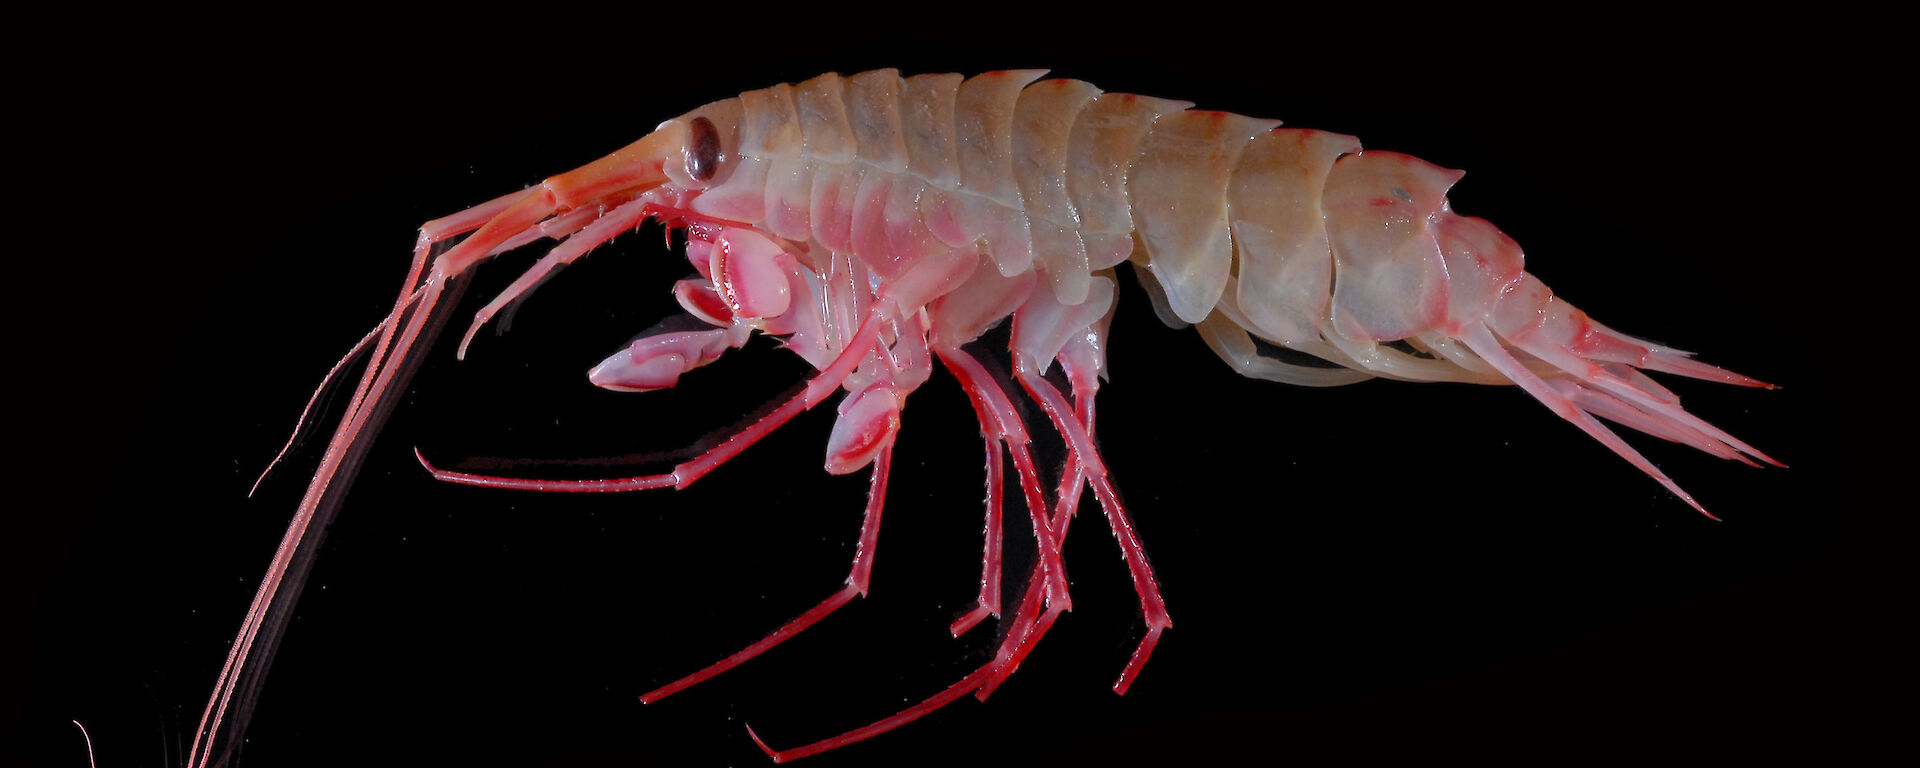 One of the Eusirus species of amphipods collected by Helena.